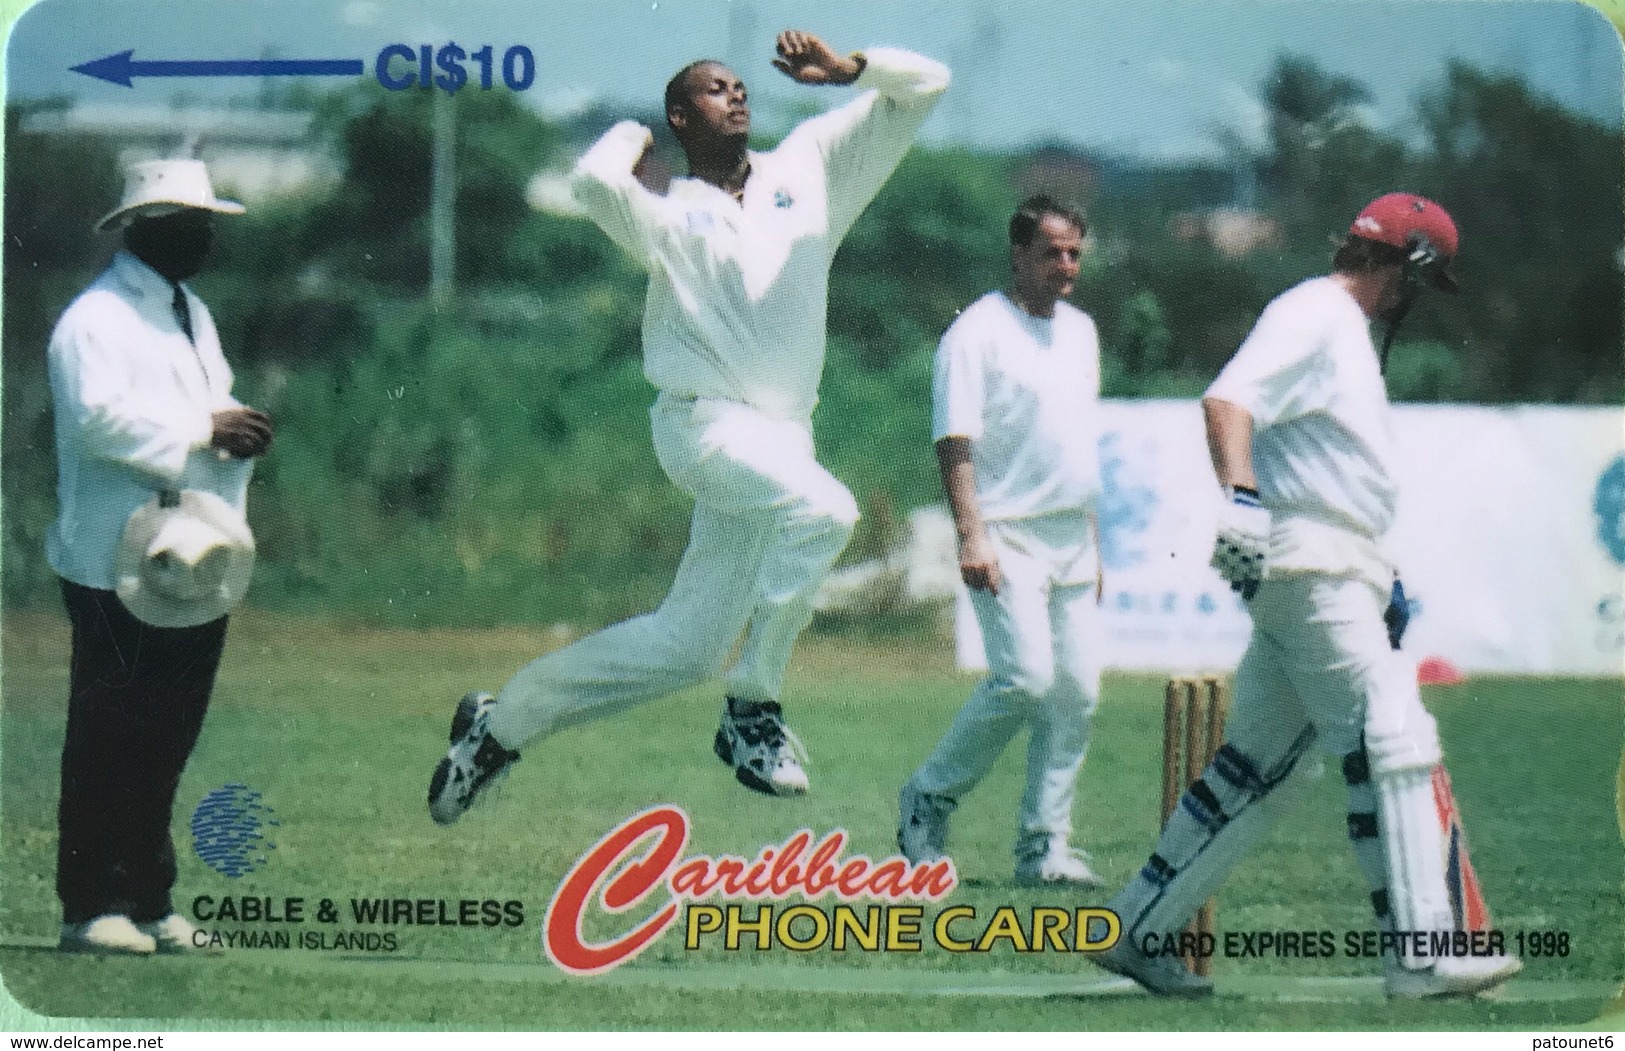 ILES CAYMAN  -  Phonecard  -  Cabble & Wirelees  - West Indies Captain Courtney Walsh  -  CI $ 10 - Cayman Islands